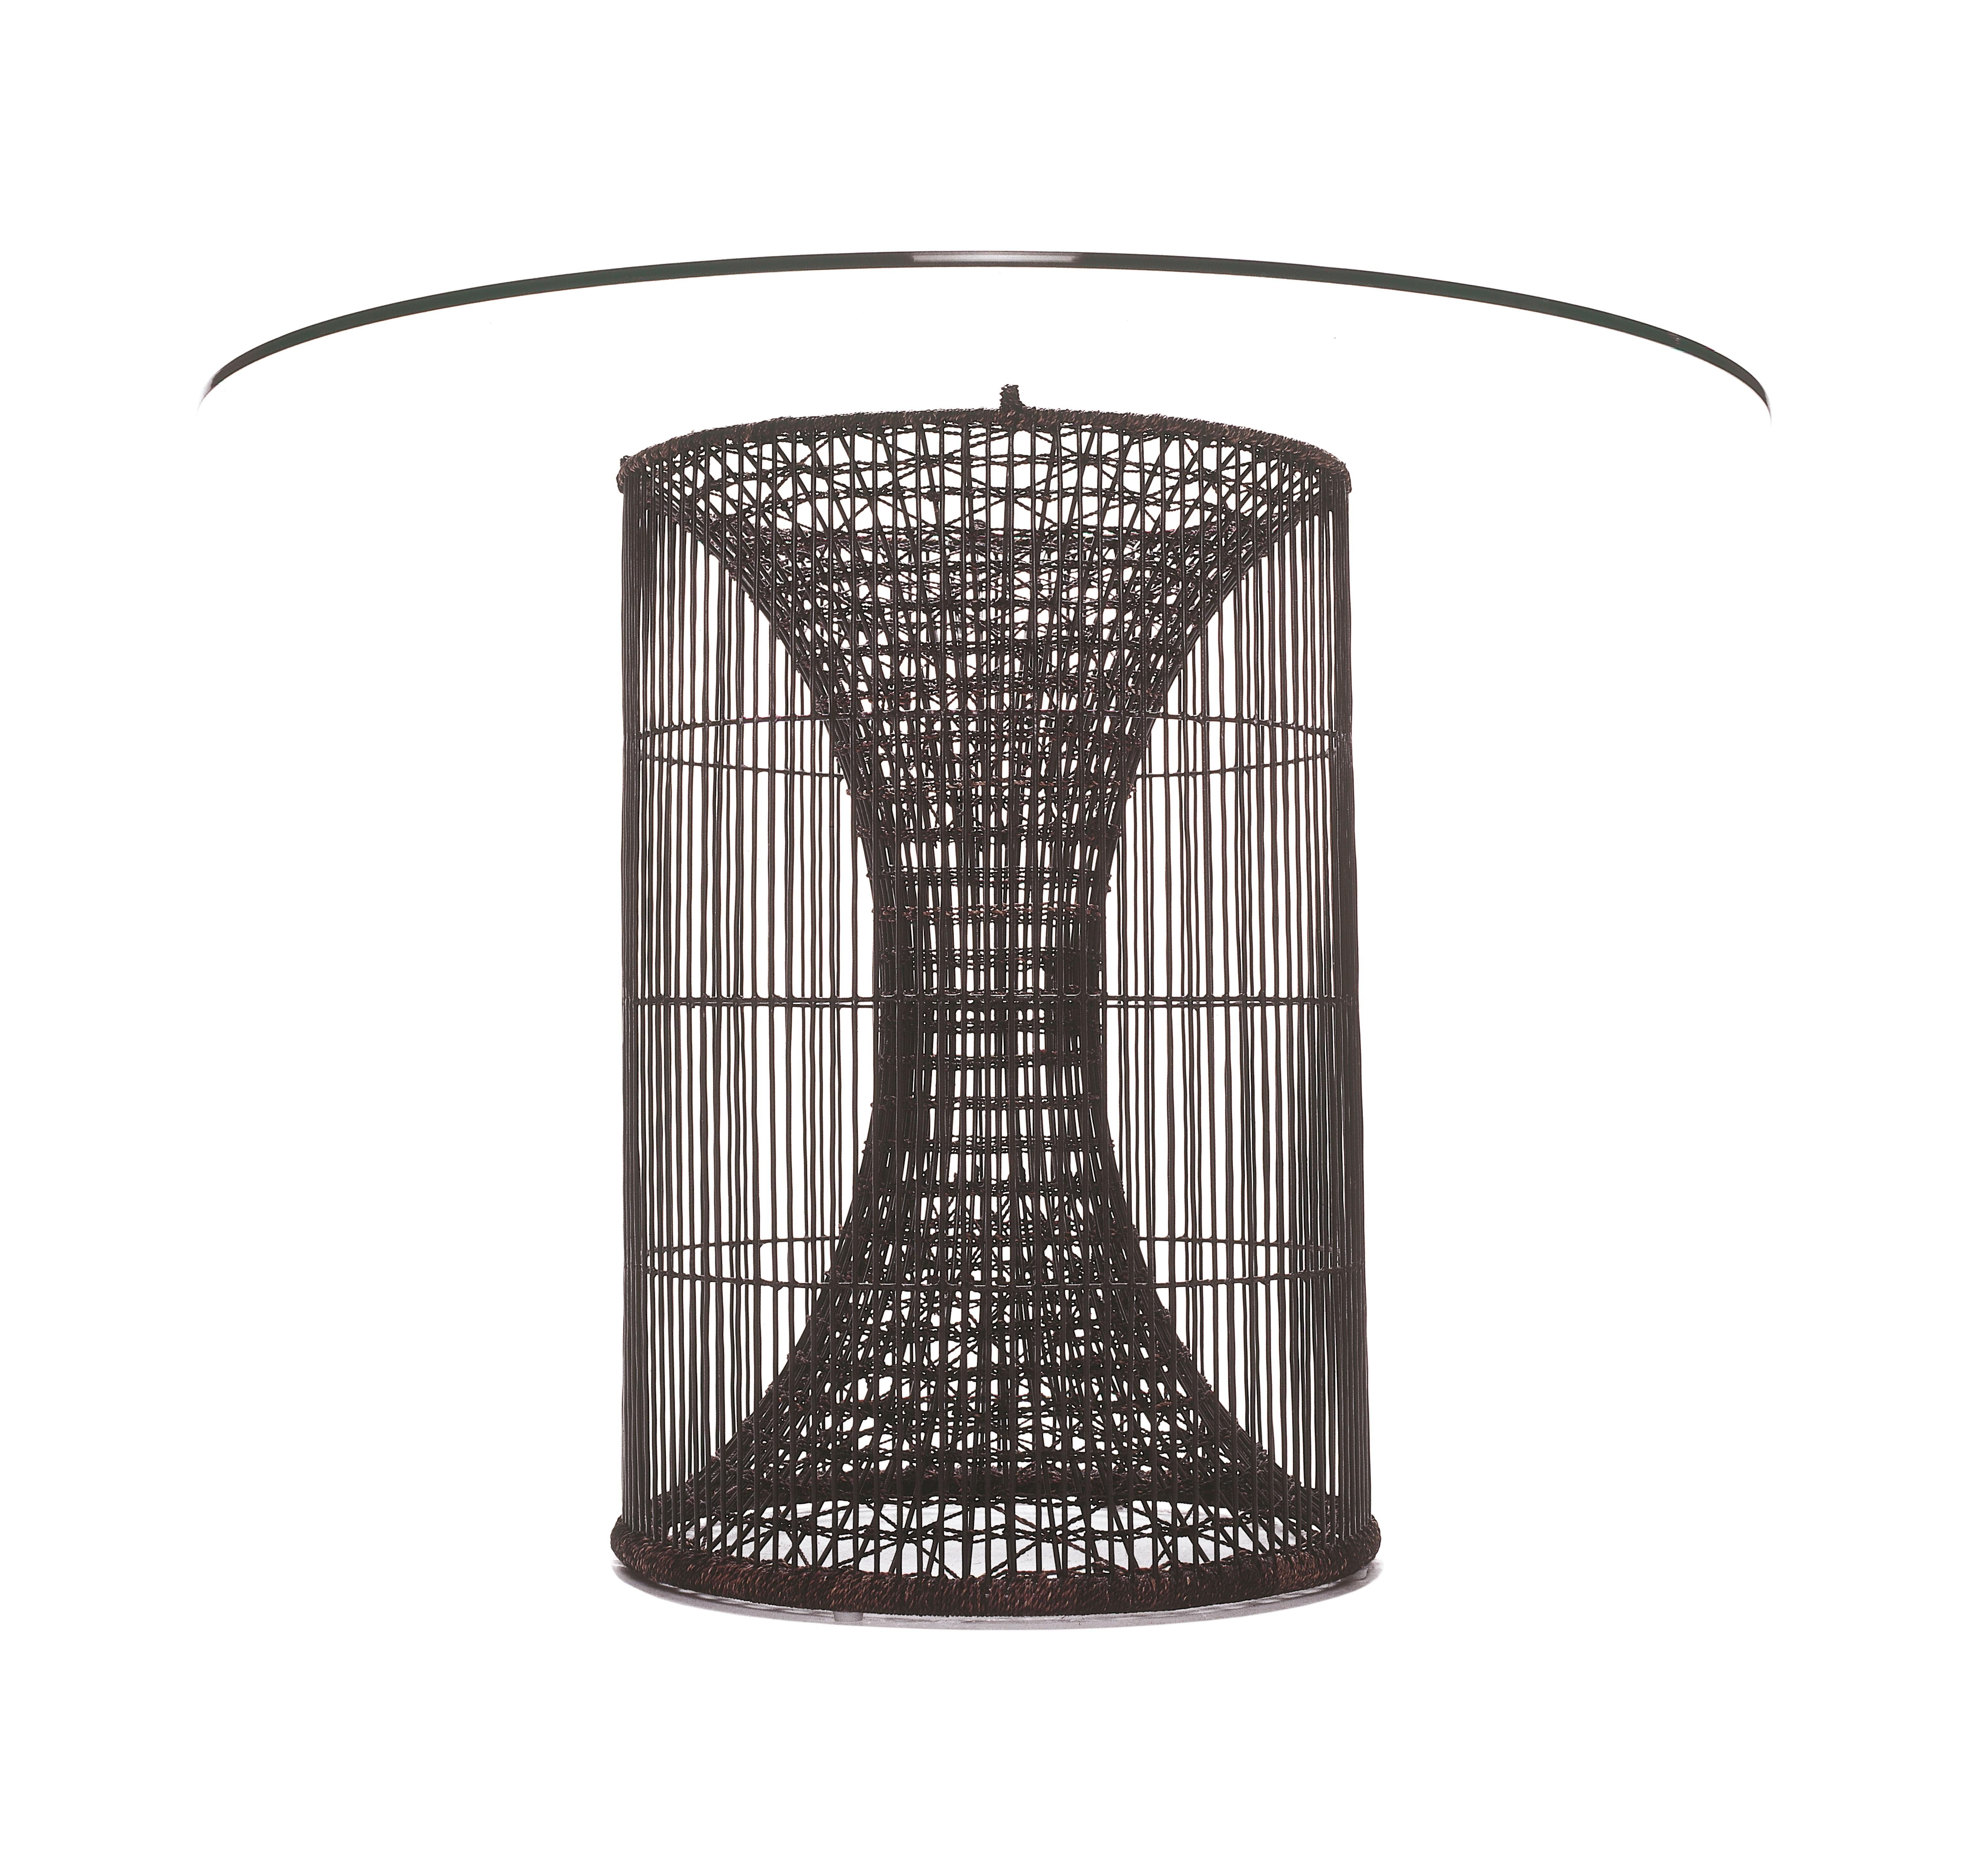 Amaya regular dining table by Kenneth Cobonpue
Materials: Polyethelene. Steel. Glass.
Dimensions: 
Table diameter 51 cm x height 74 cm
Glass diameter 122cm x height 1cm

Inspired by fish traps, the Amaya tables resemble a vortex enclosed